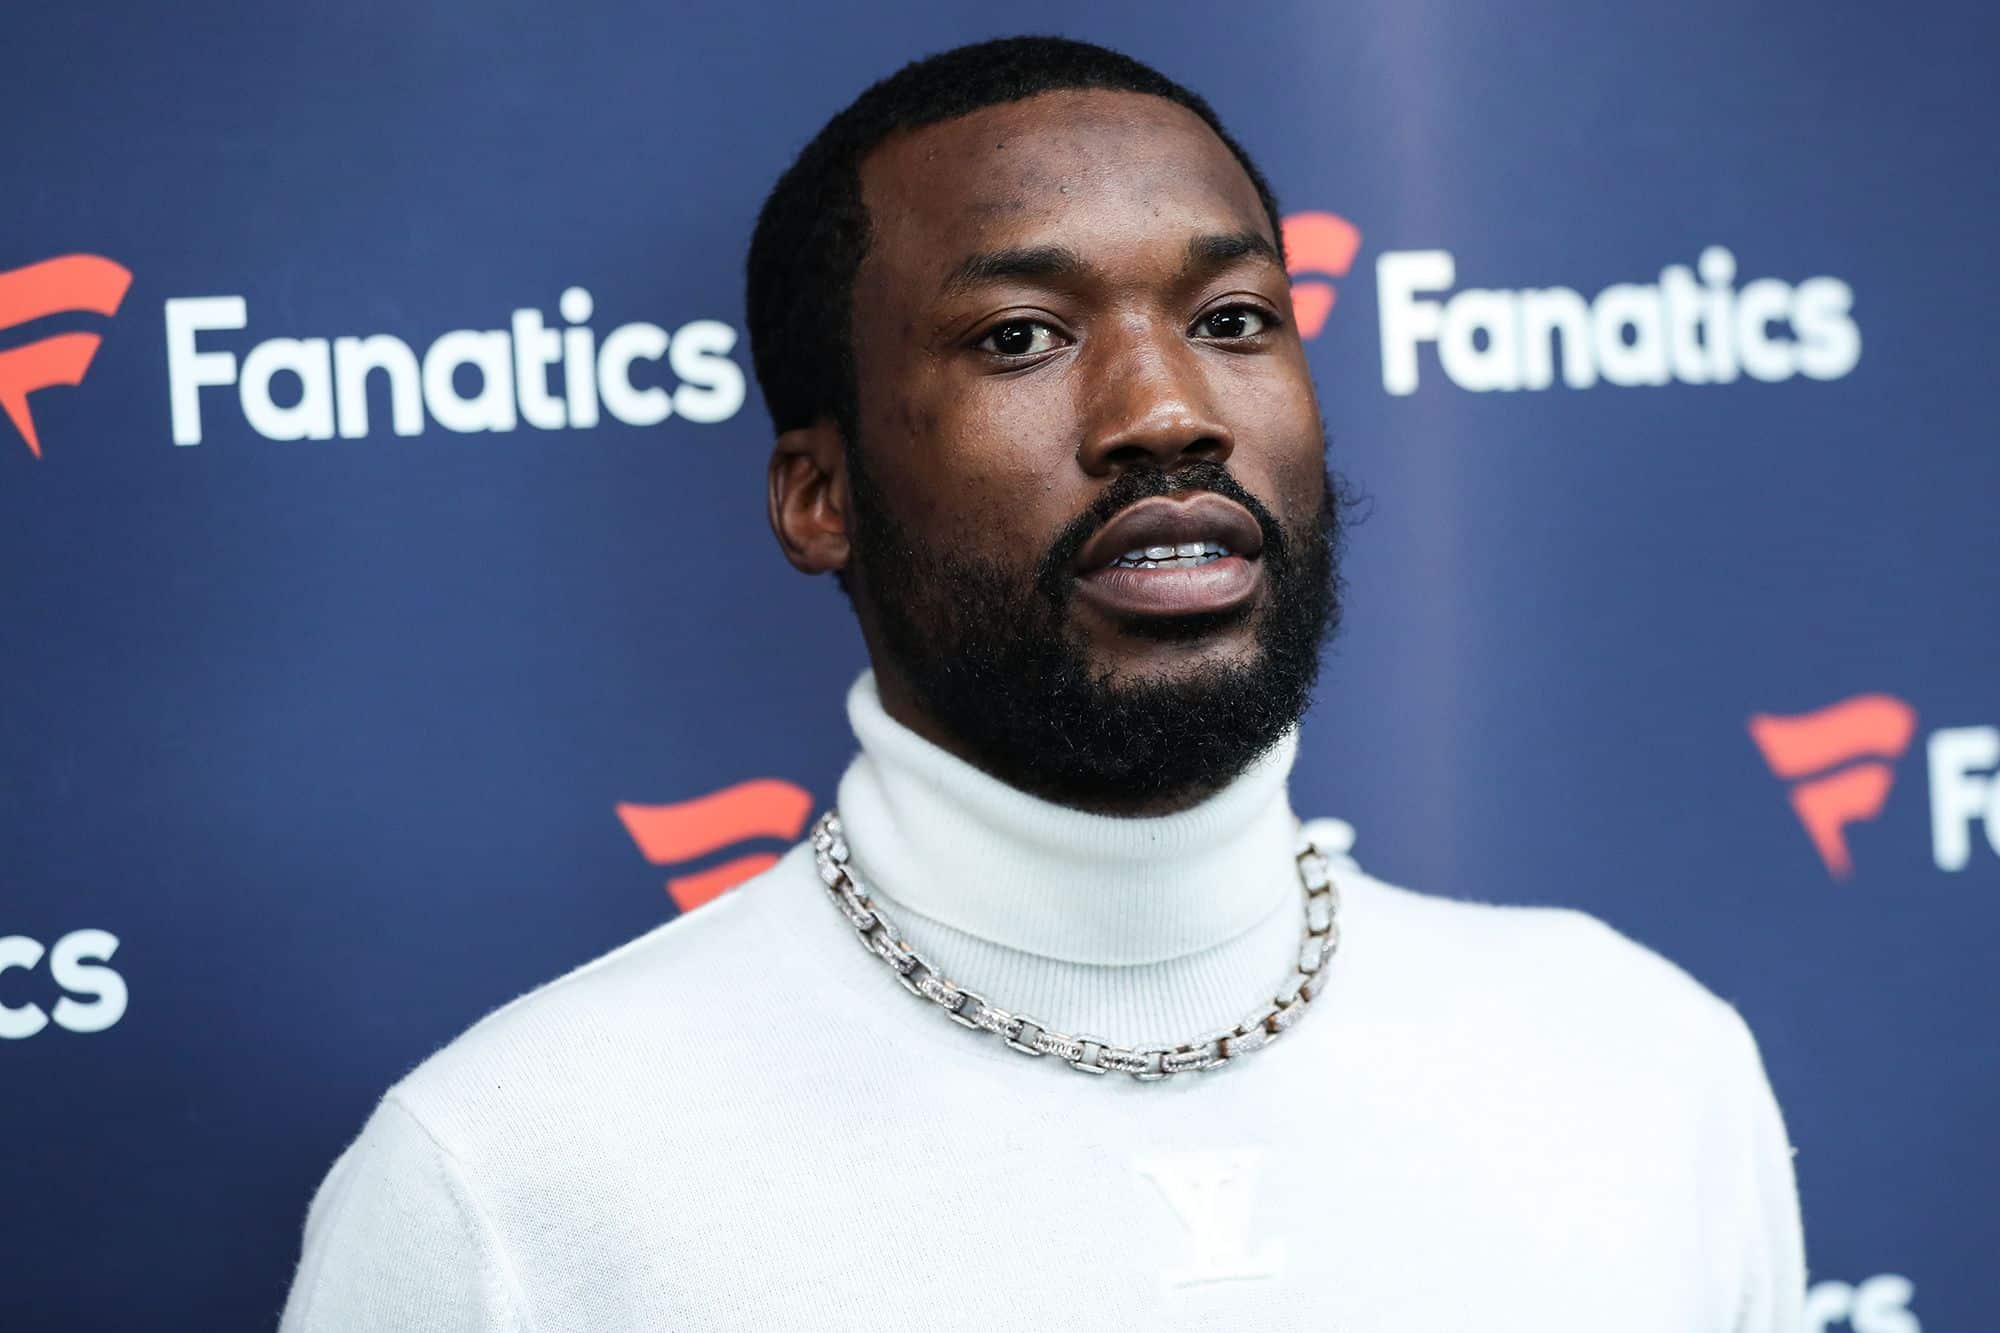 'I Wanna Get Citizenship In Ghana' - Rapper Meek Mill Considers Relocating To Africa, Cites Reasons